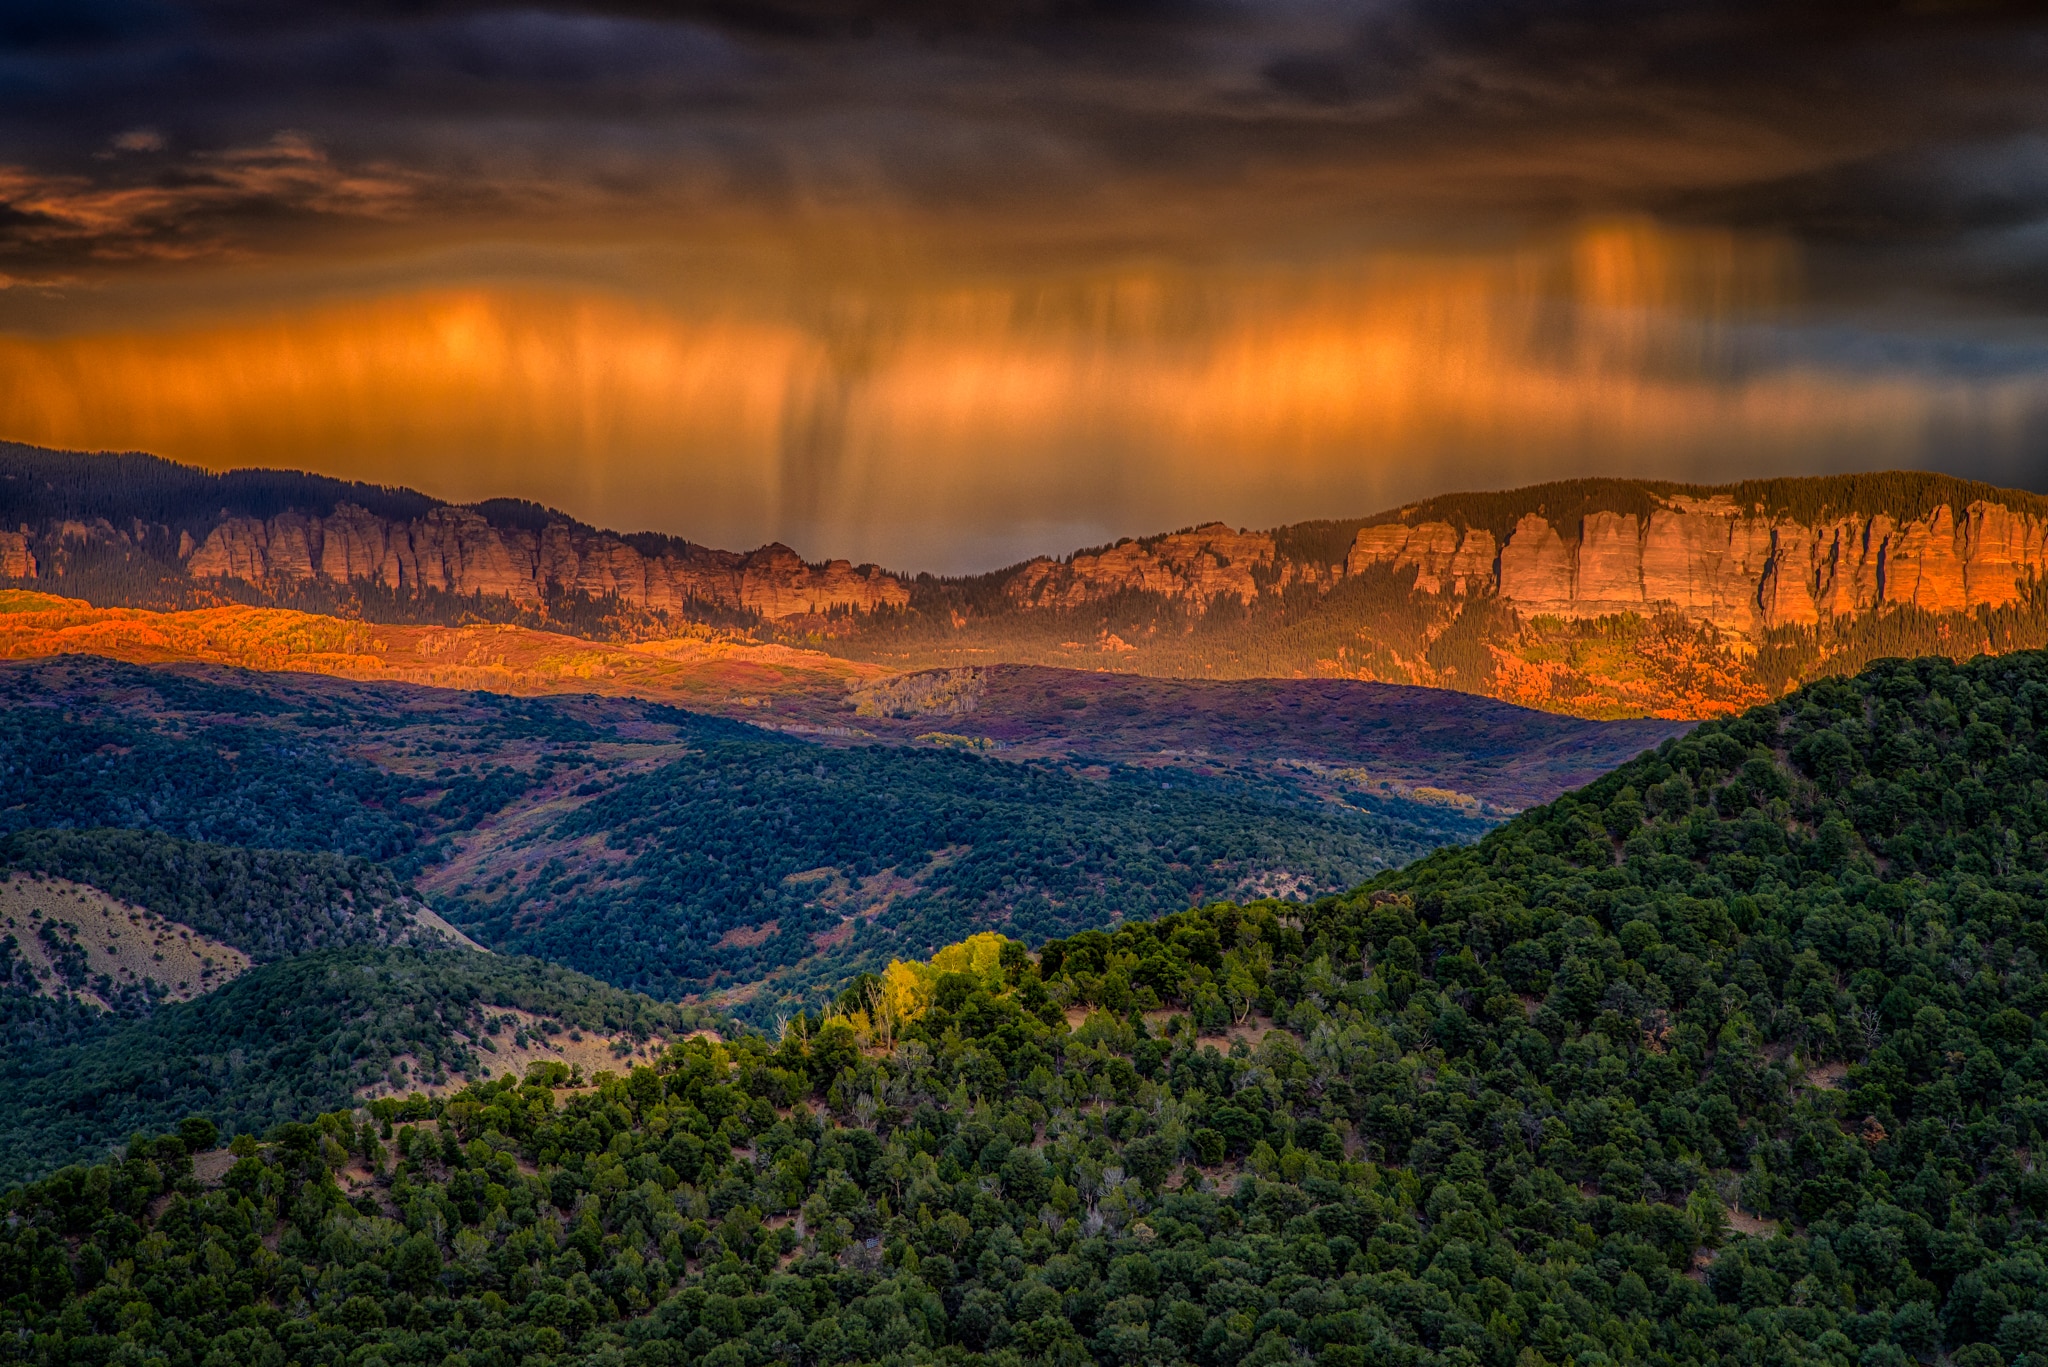 Virga over the Cimarron mountains catches the light of the setting sun, as seen from Ridgeway State Park, Colorado.